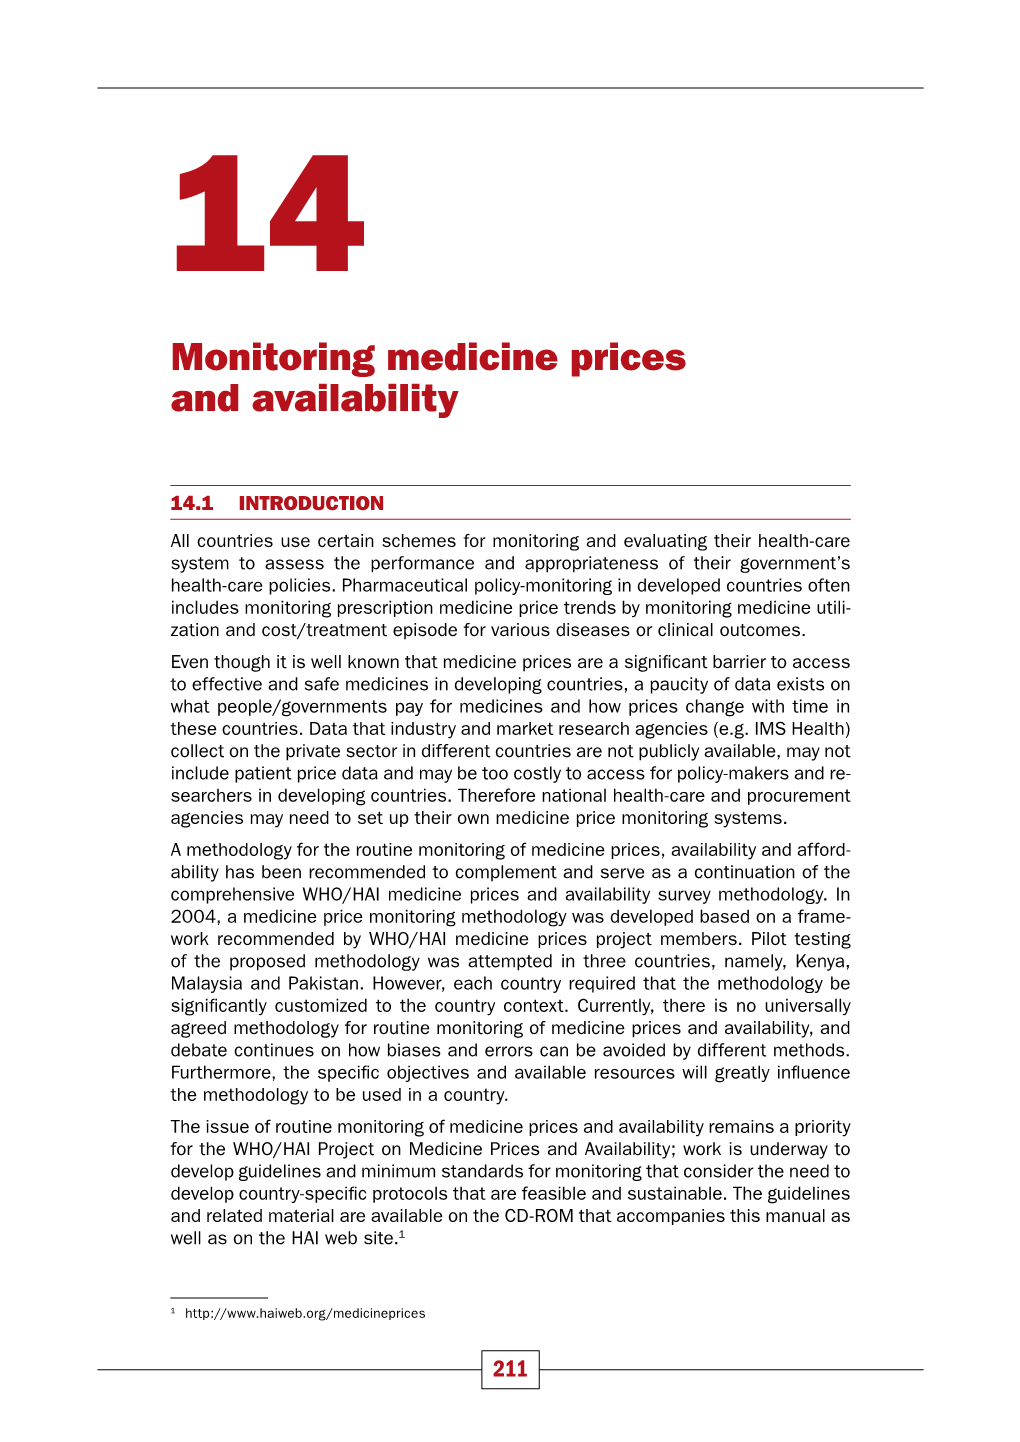 Monitoring Medicine Prices and Availability